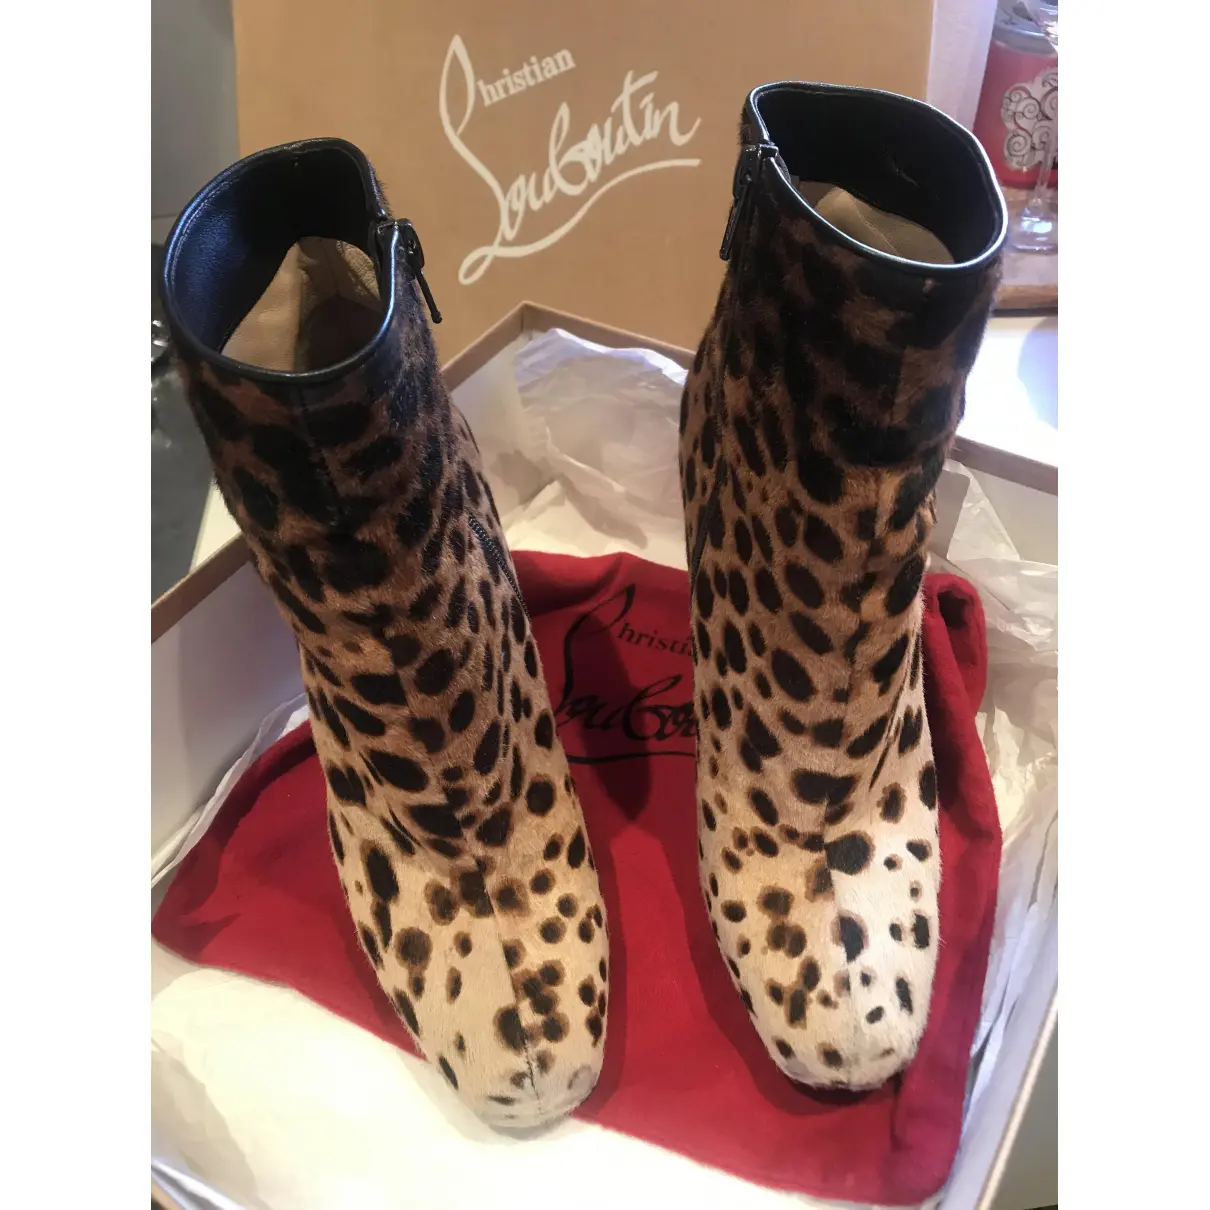 Pony-style calfskin ankle boots Christian Louboutin